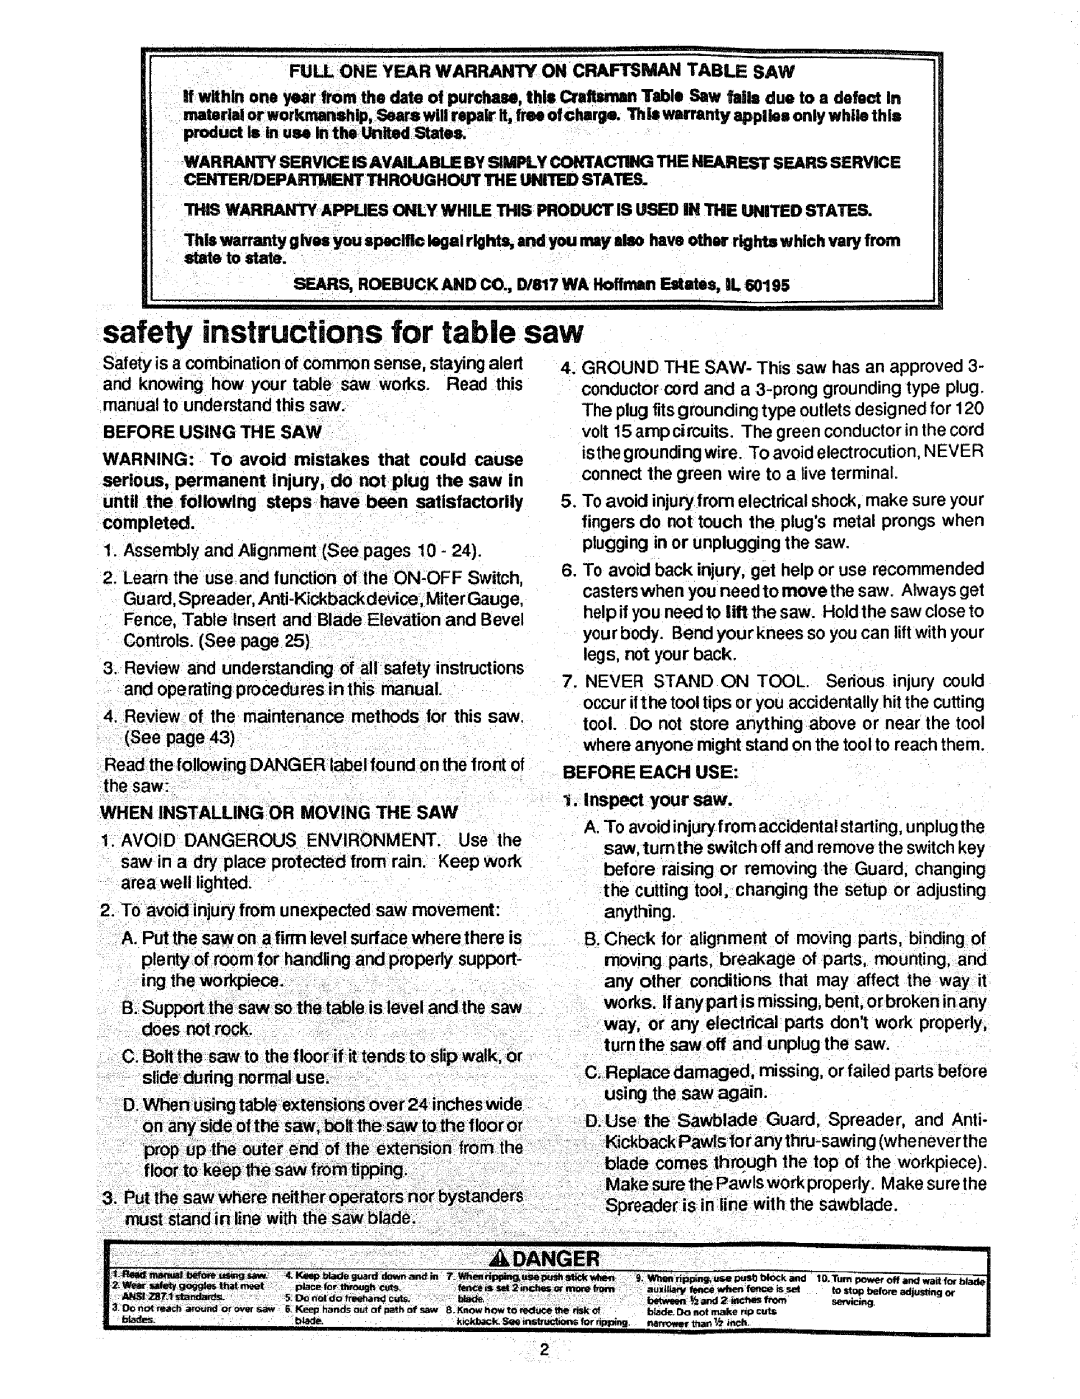 Craftsman 113.298721, 113.298761 manual safety instructions for table saw 